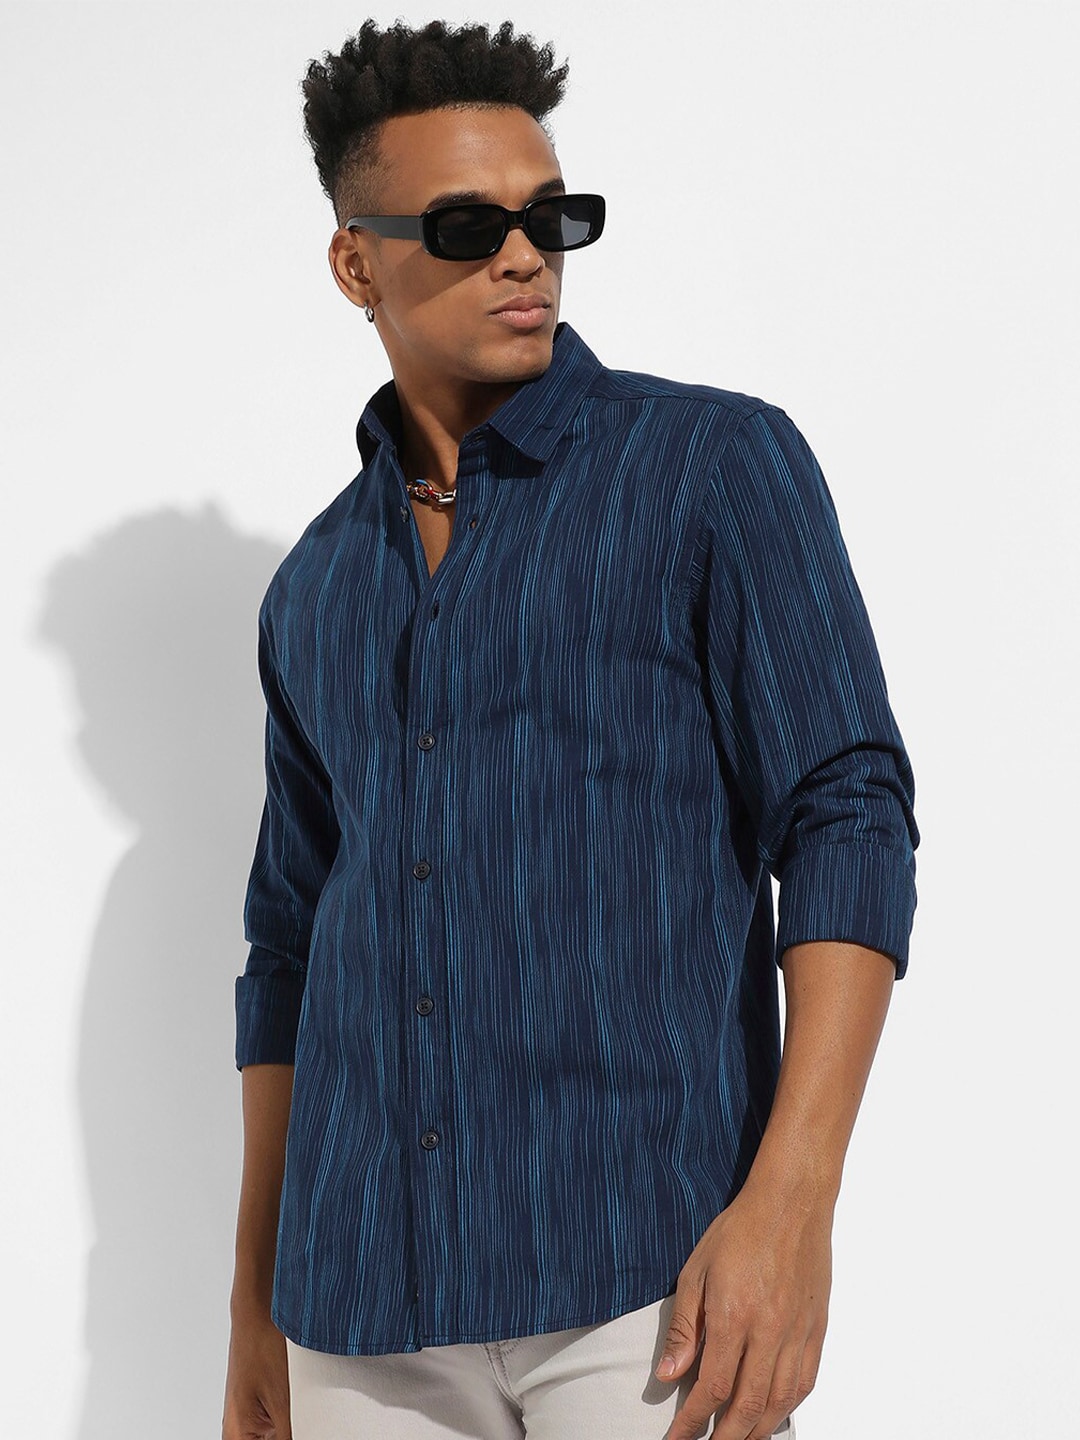 Campus Sutra Classic Fit Vertical Striped Casual Cotton Shirt